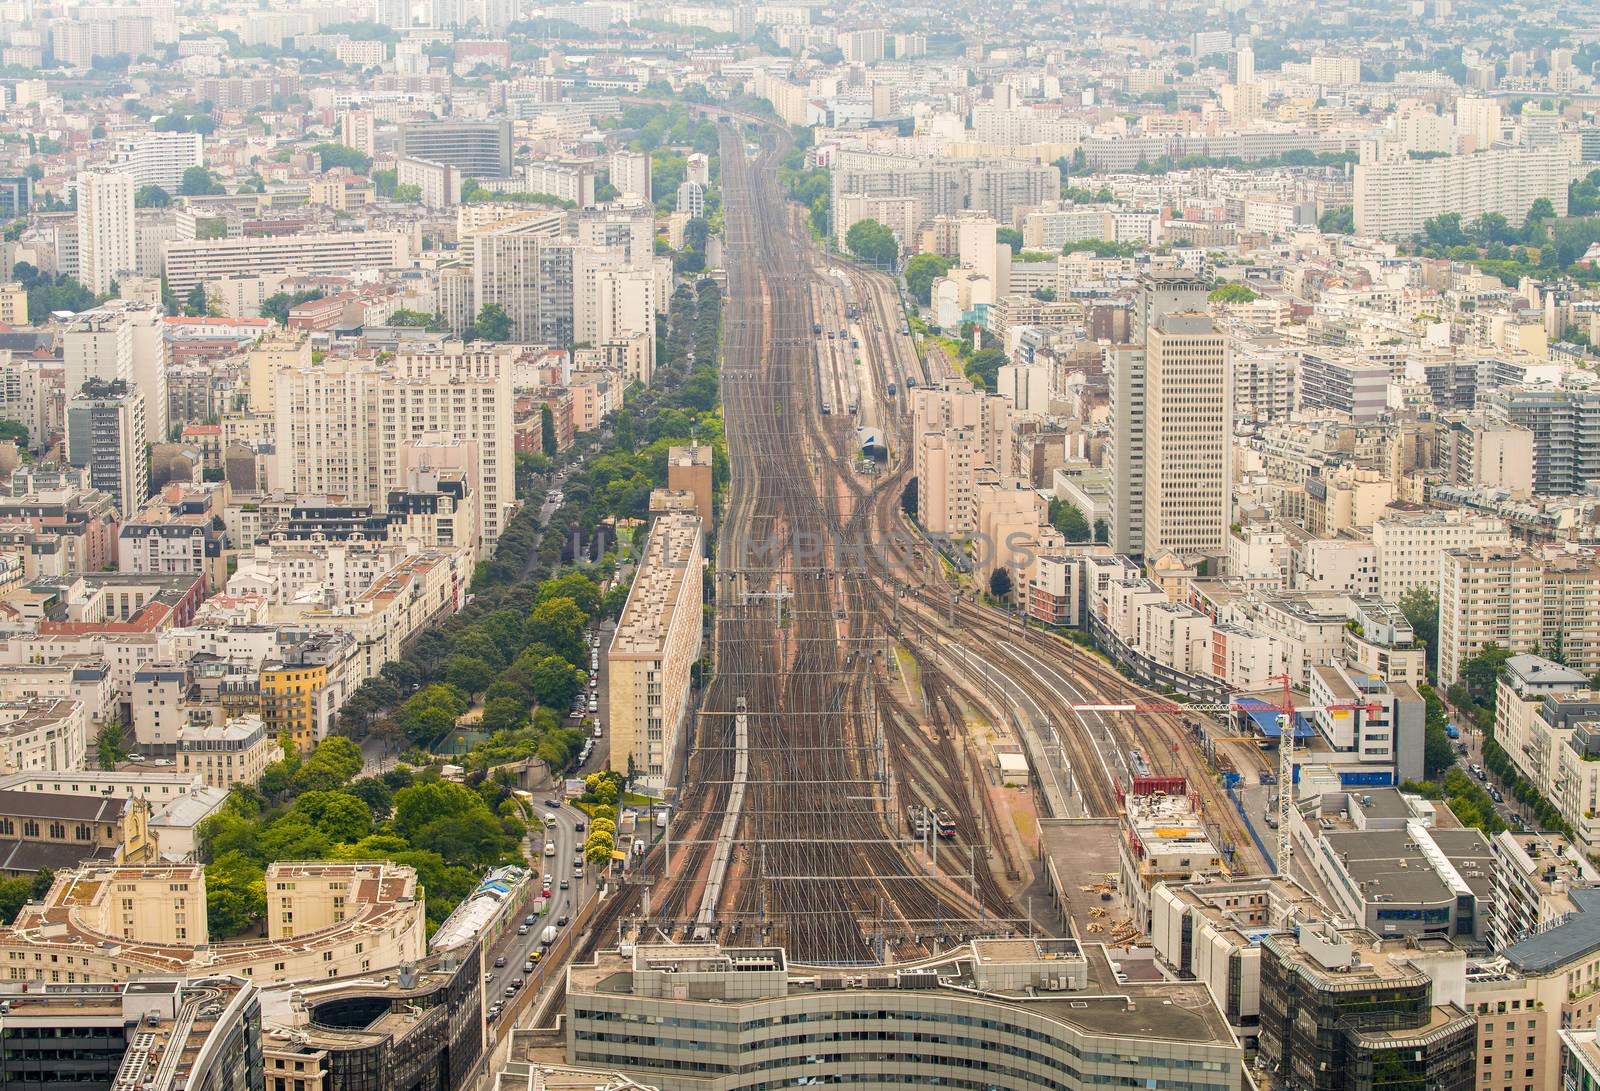 Paris train station as seen from high vantage point by jovannig